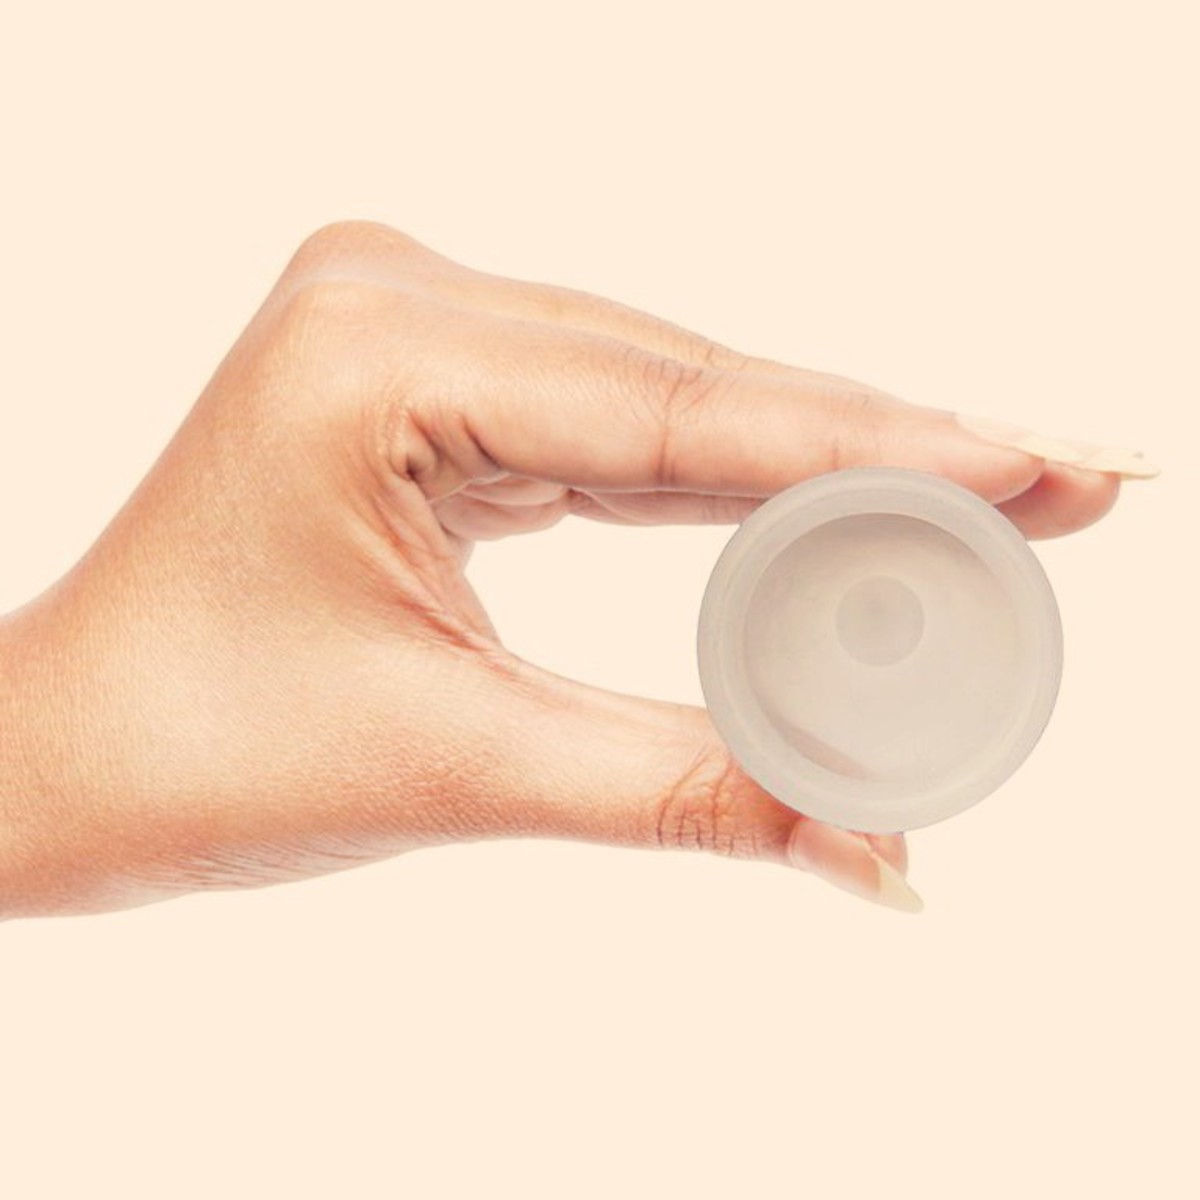 The menstrual cup’s long, sputtering history was determined by cultural and corporate factors.